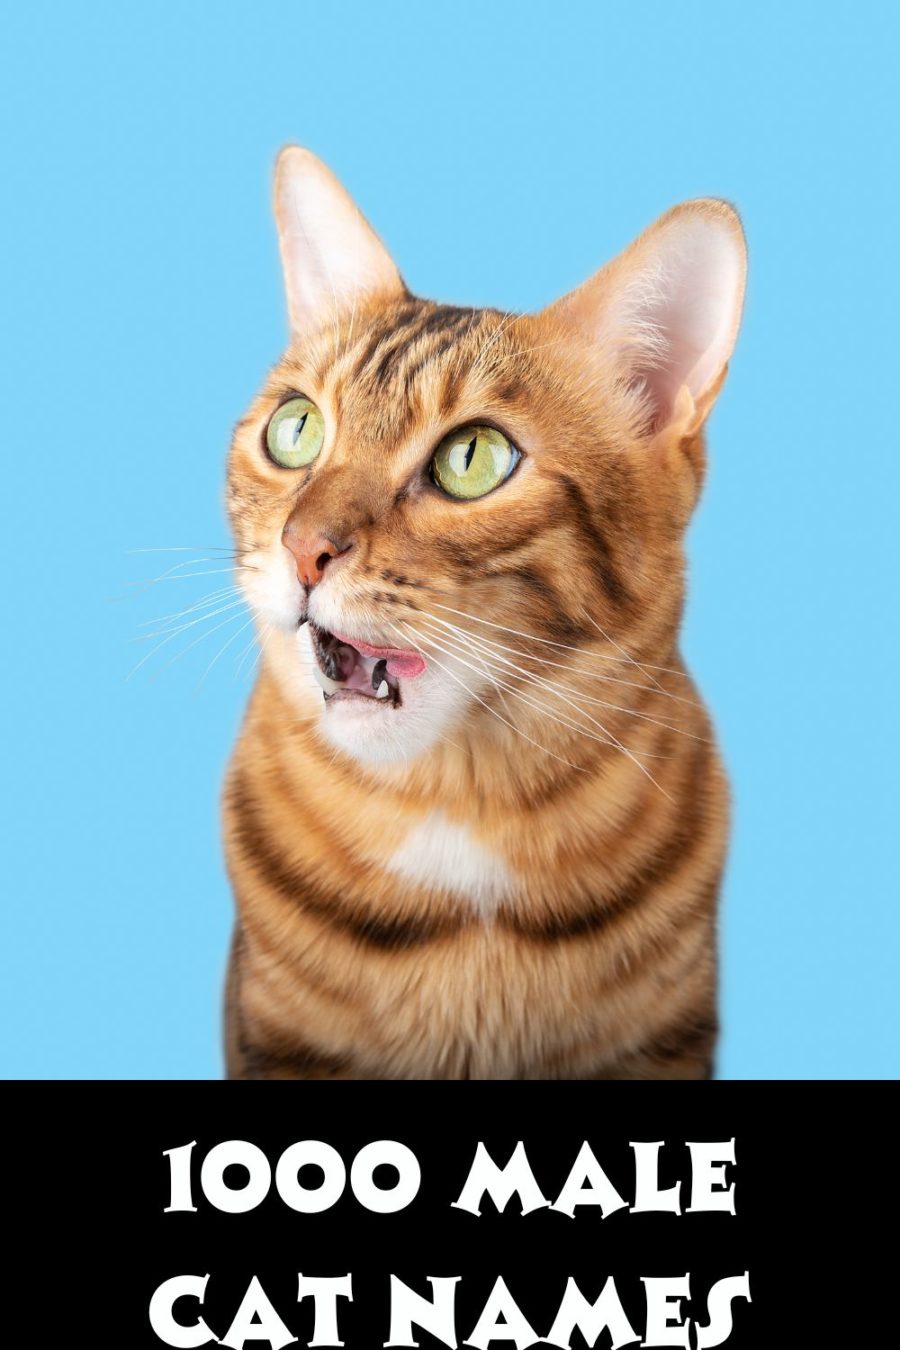 cat licking lips with blue background; below the cat are the words 1000 Male Cat Names